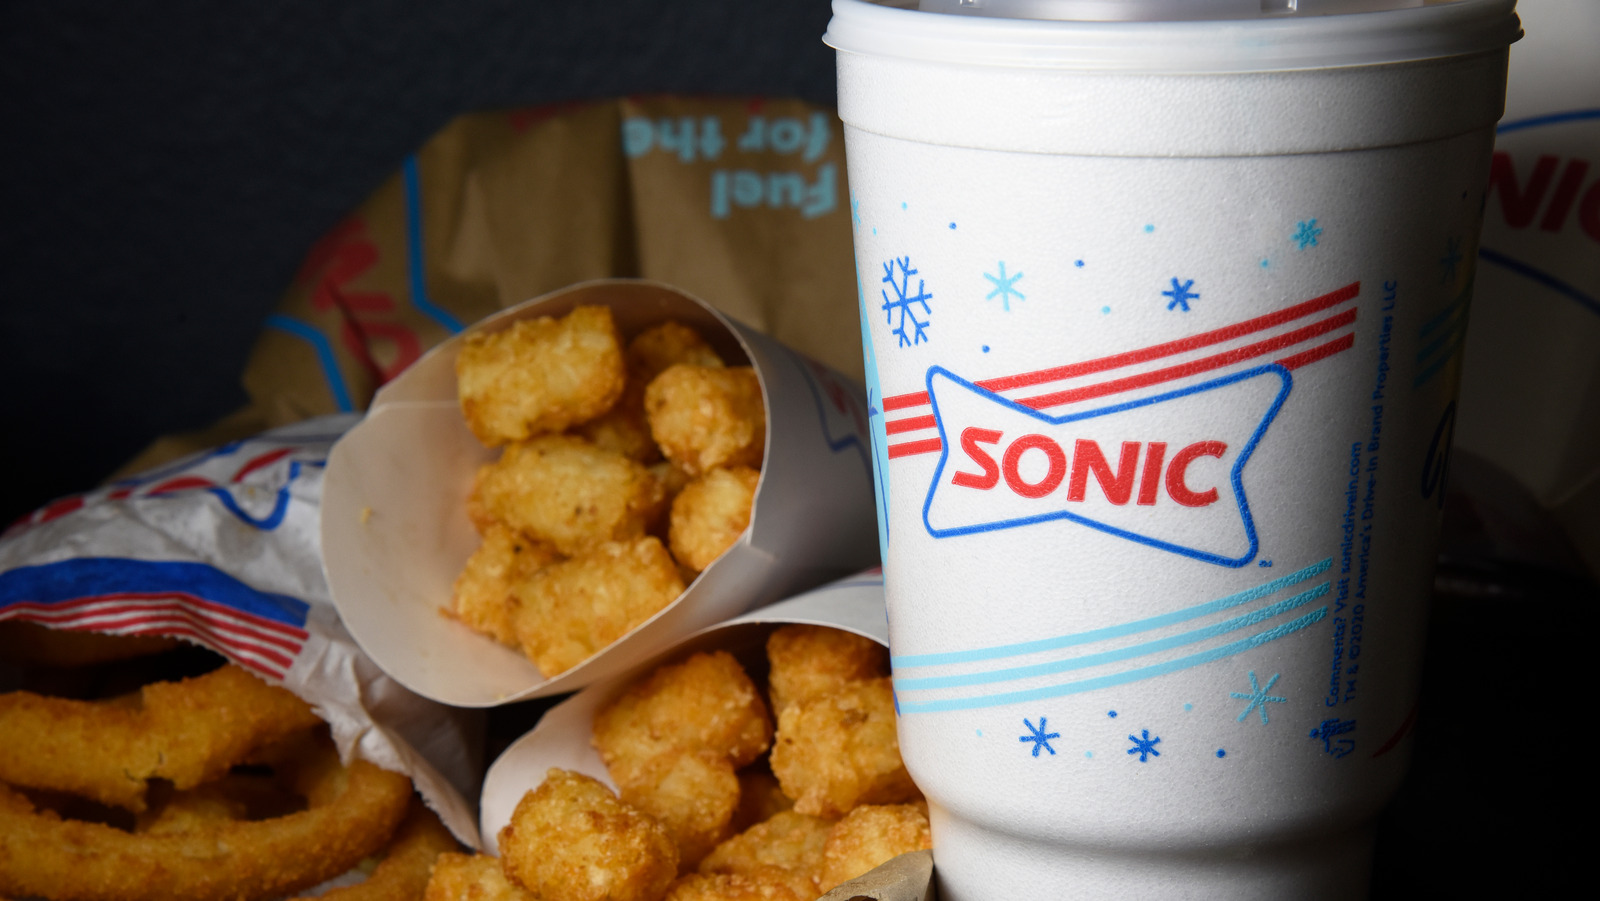 Sonic's new menu items combine sweet, savory and a touch of nostalgia